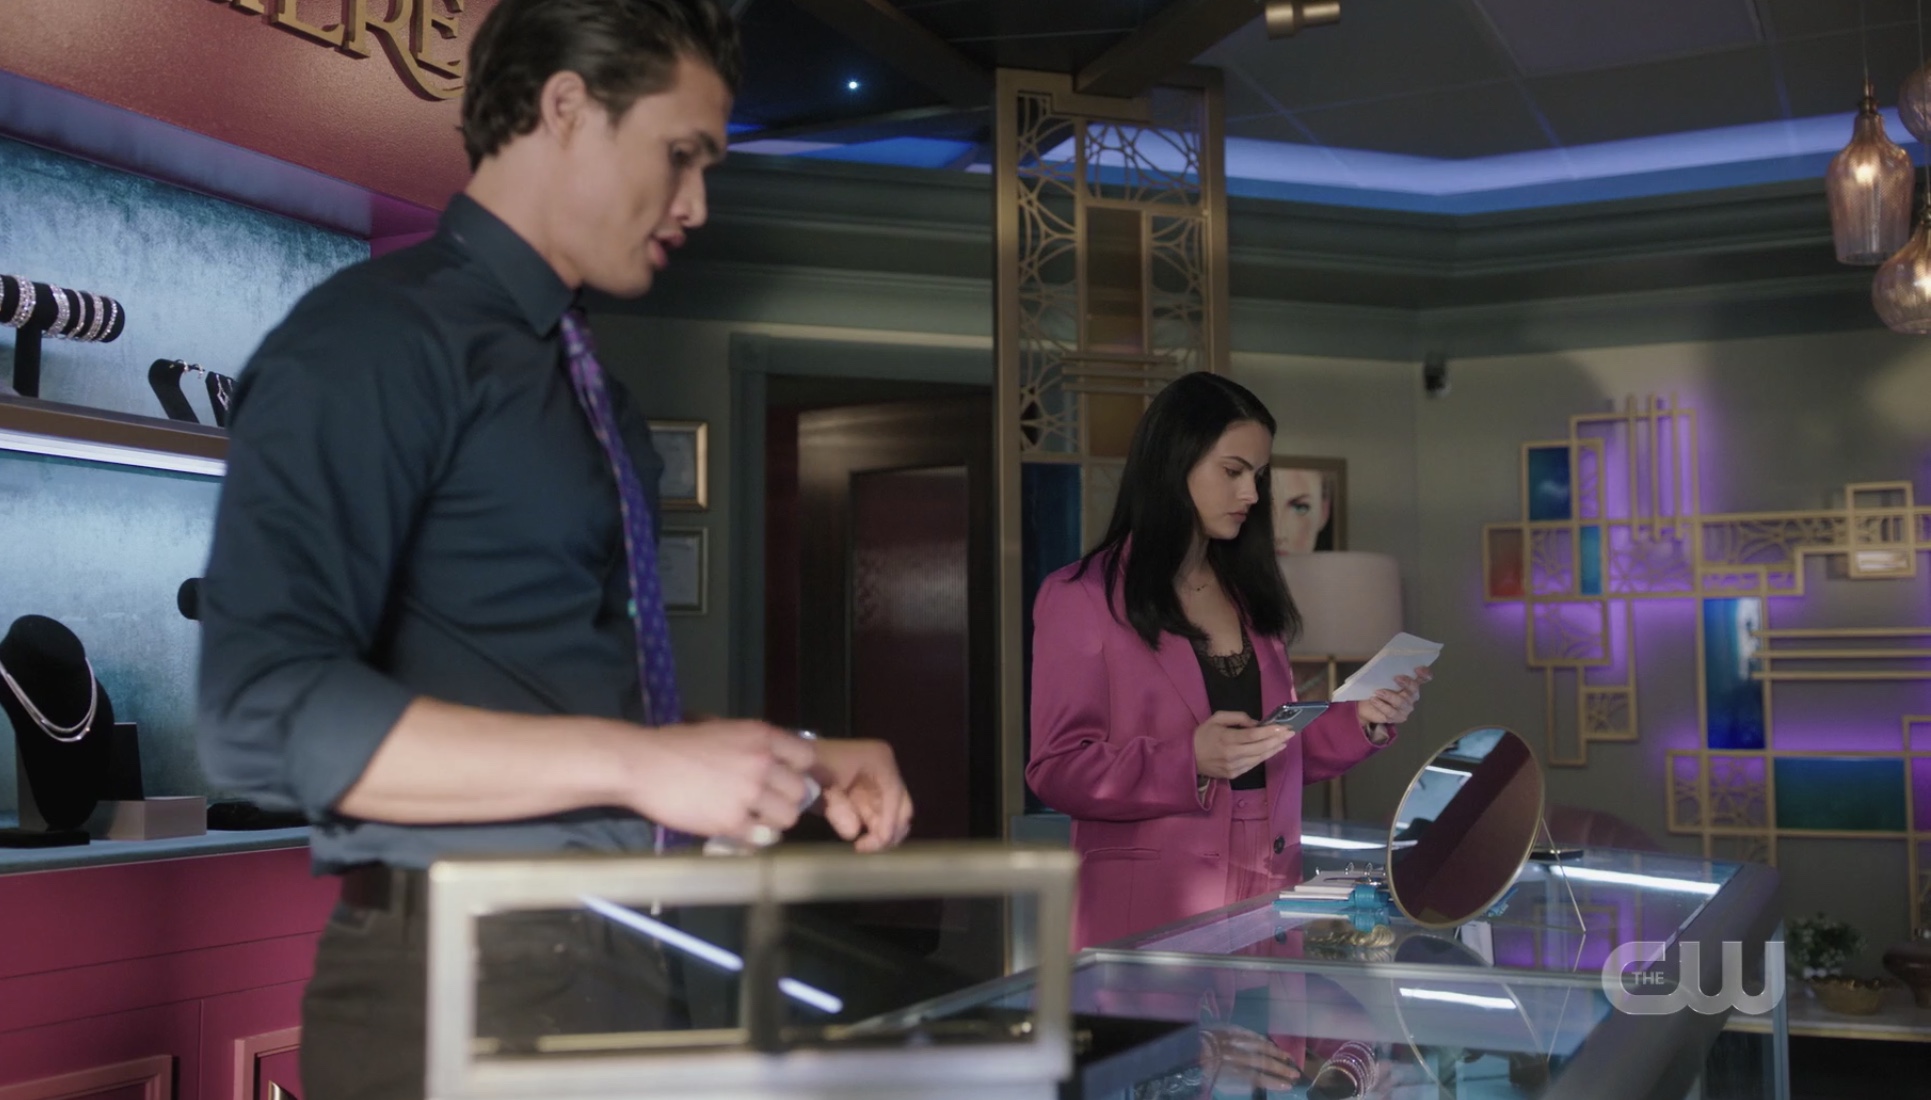 Veronica's Riverdale jewelry store has a new employee: Reggie Mantle